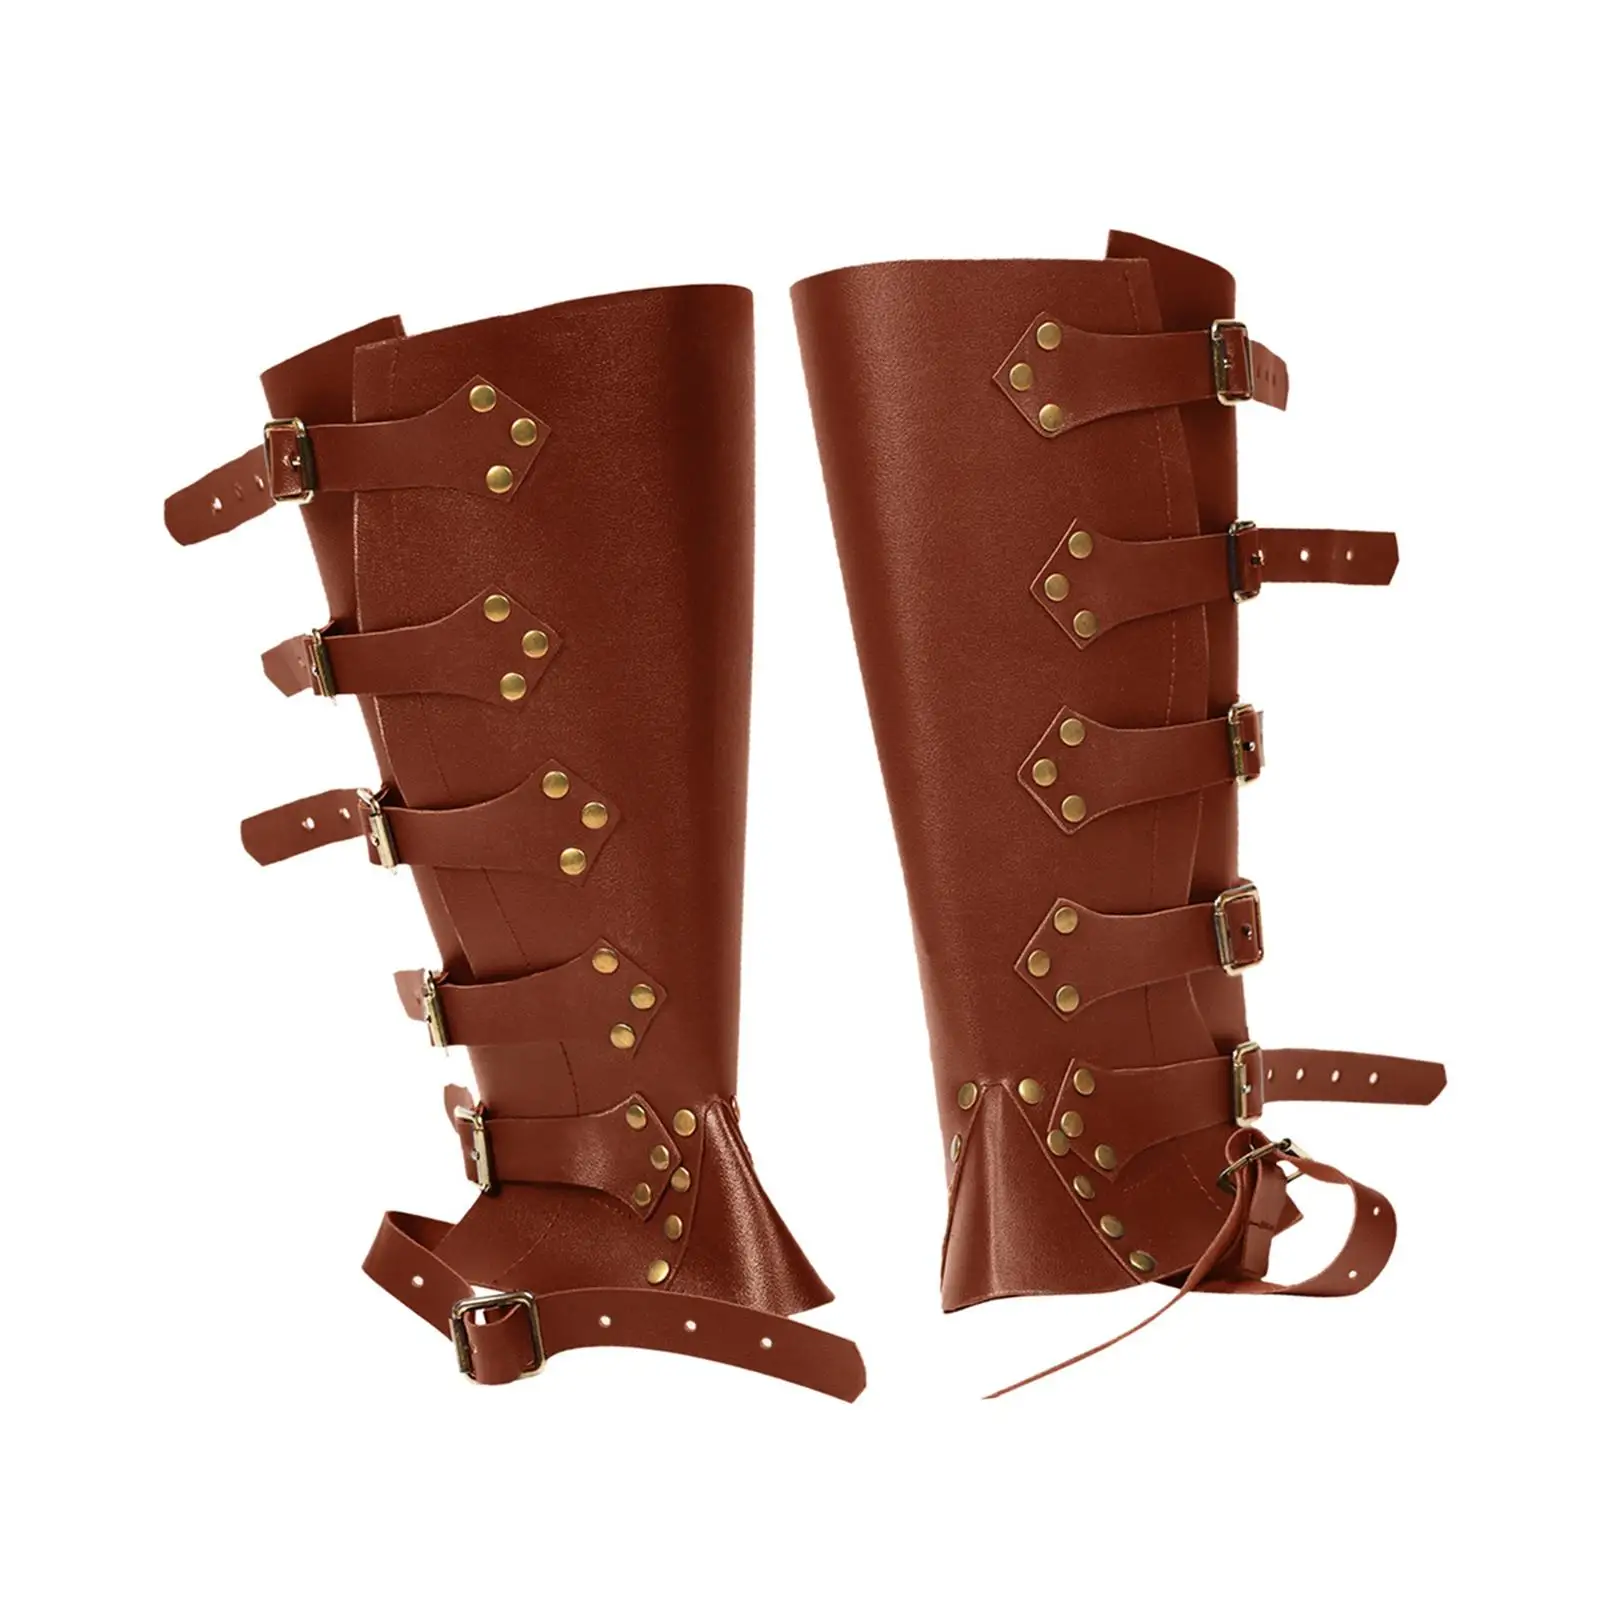 Vintage Style Medieval Boots Shoes Cover Waterproof Knight Costume Accessories Faux Leather Leg Guards Pirate Boots Tops Covers